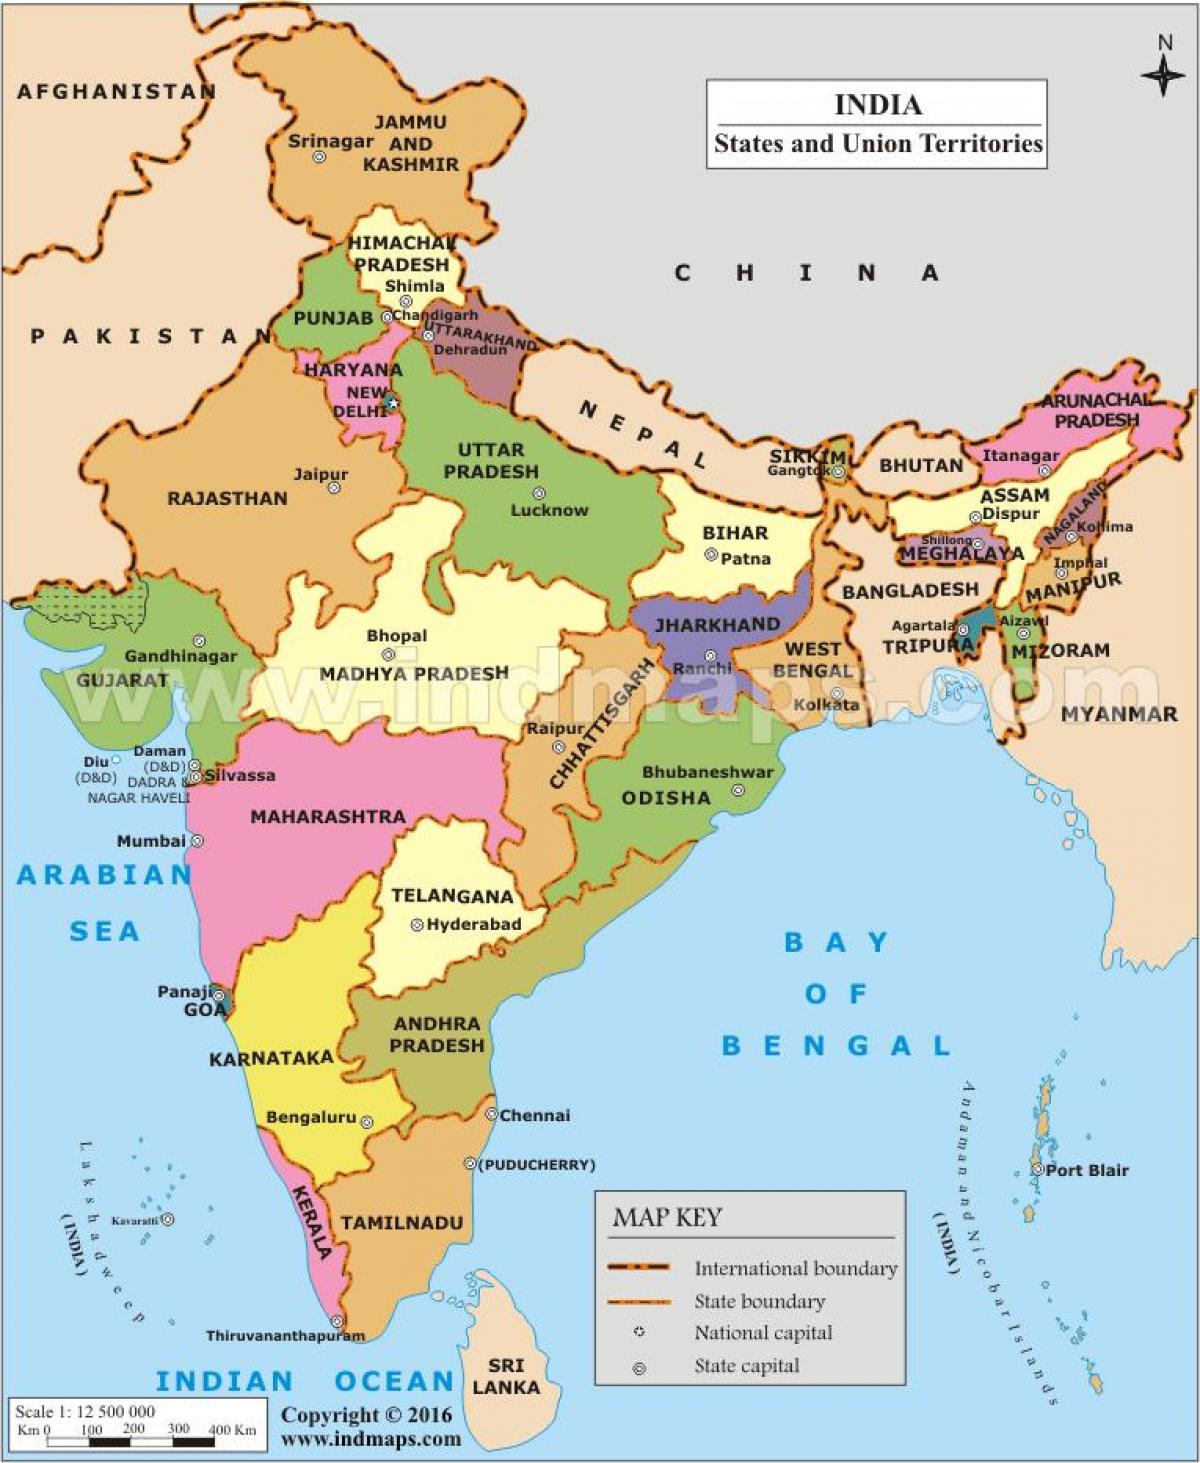 India state map - State map of India (Southern Asia - Asia)